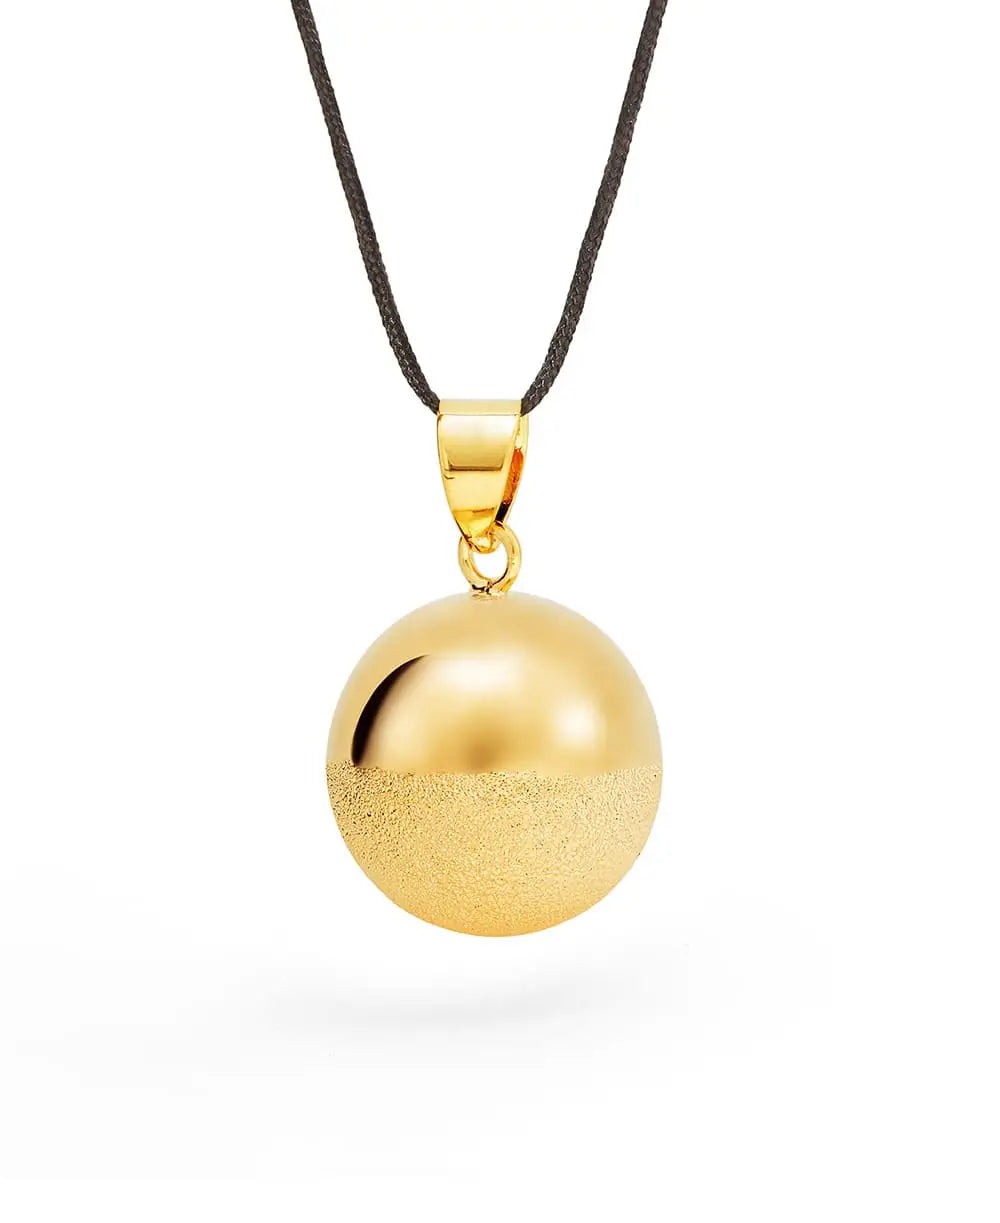 Mom-to-be necklace - Sphère - Gold plated - diamond cut